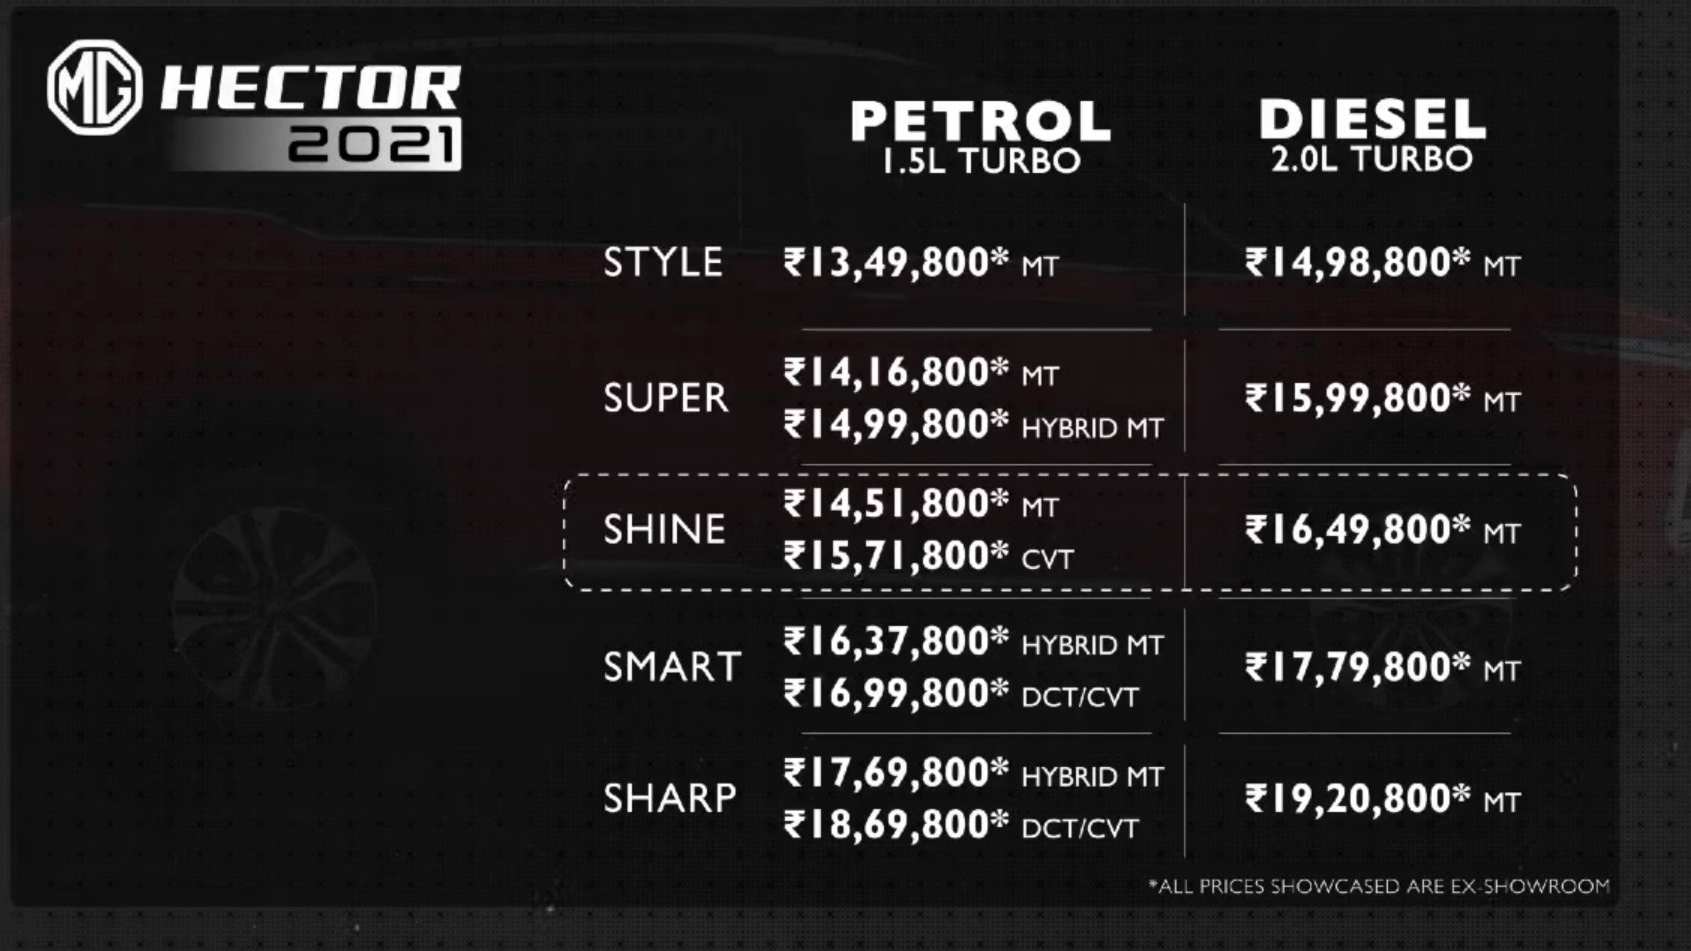 Prices of the MG Hector Shine in comparison to other variants. Image: MG